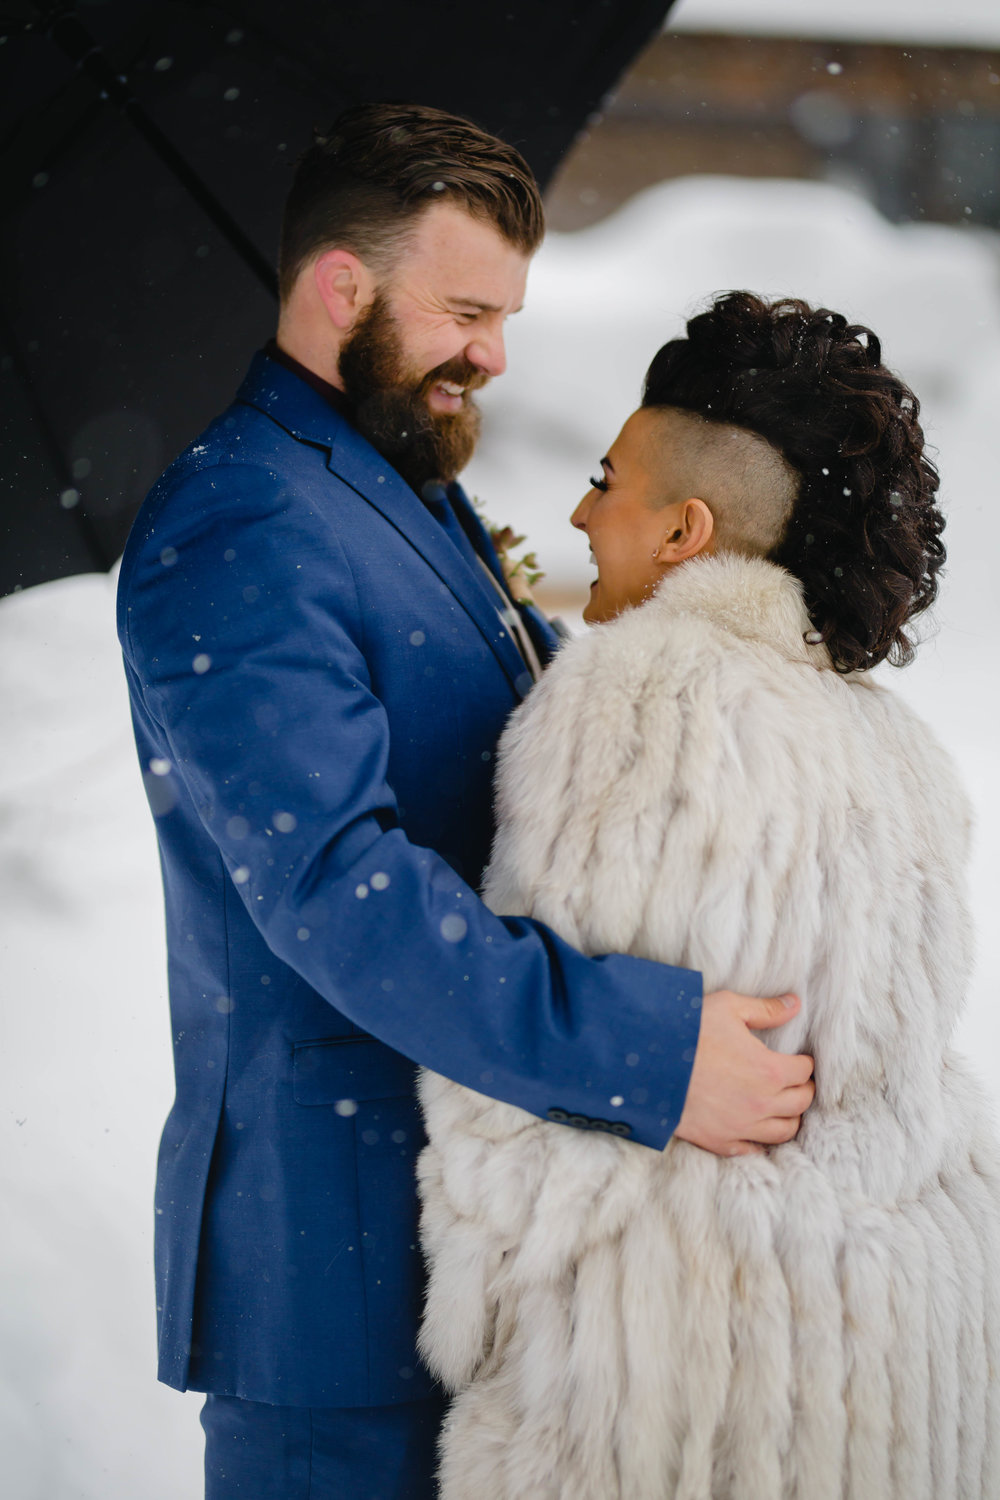 candid photo of the bride and groom during their first look for snowy wedding photos